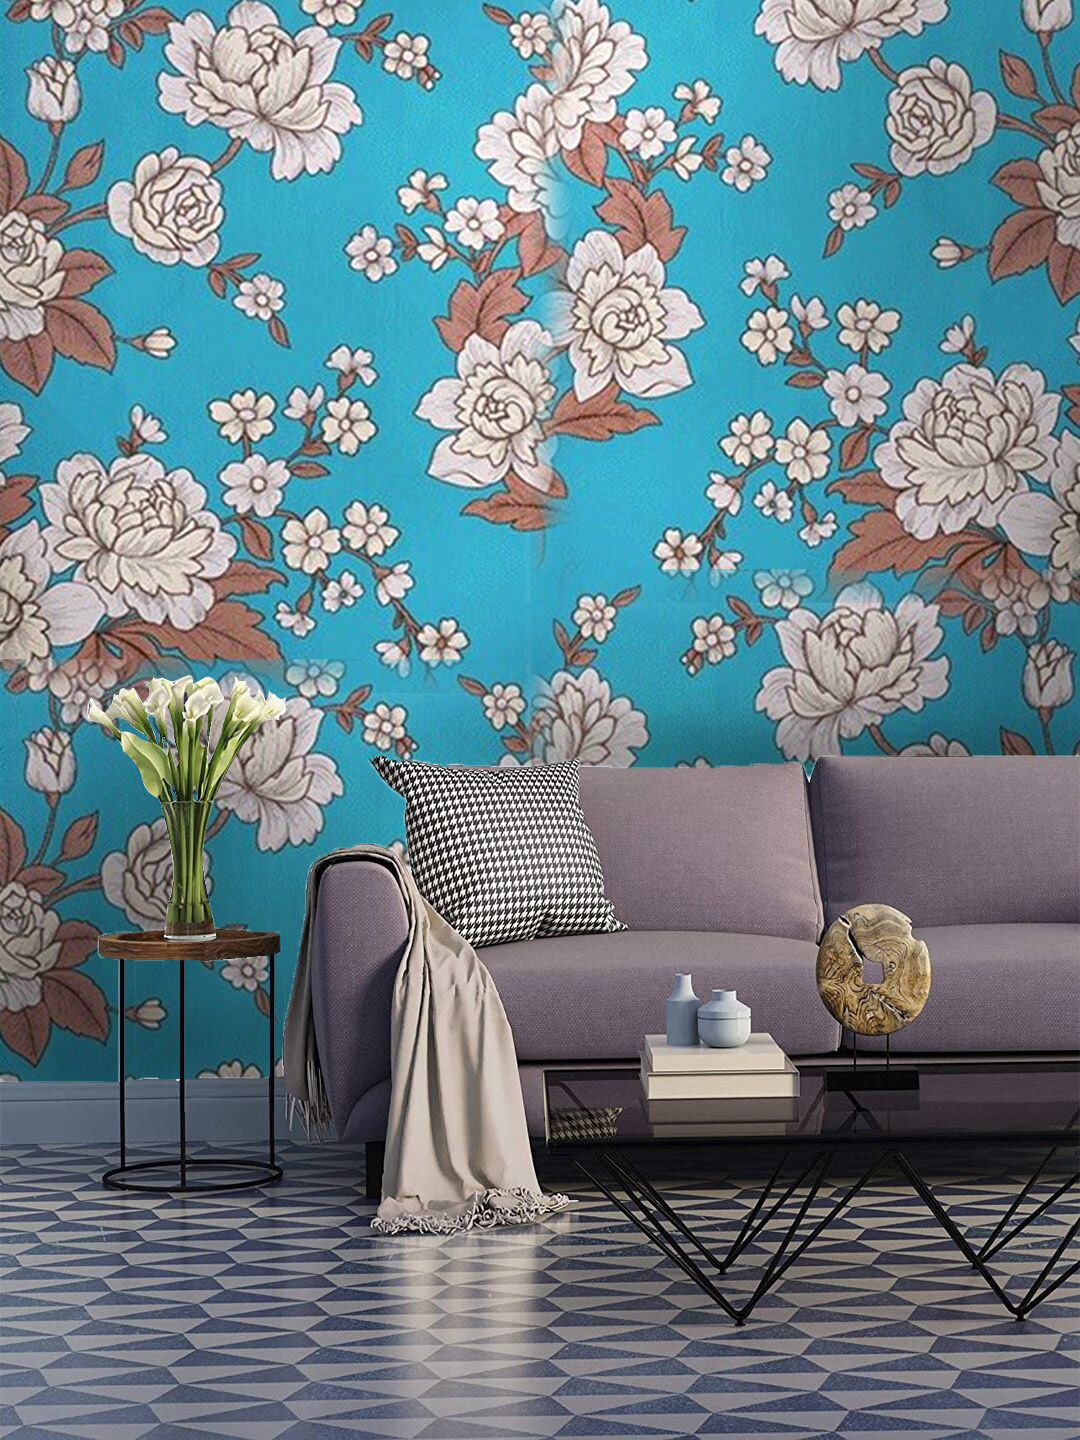 Jaamso Royals Turquoise Blue Self-adhesive & Waterproof Flower With Leaves Wallpaper Price in India